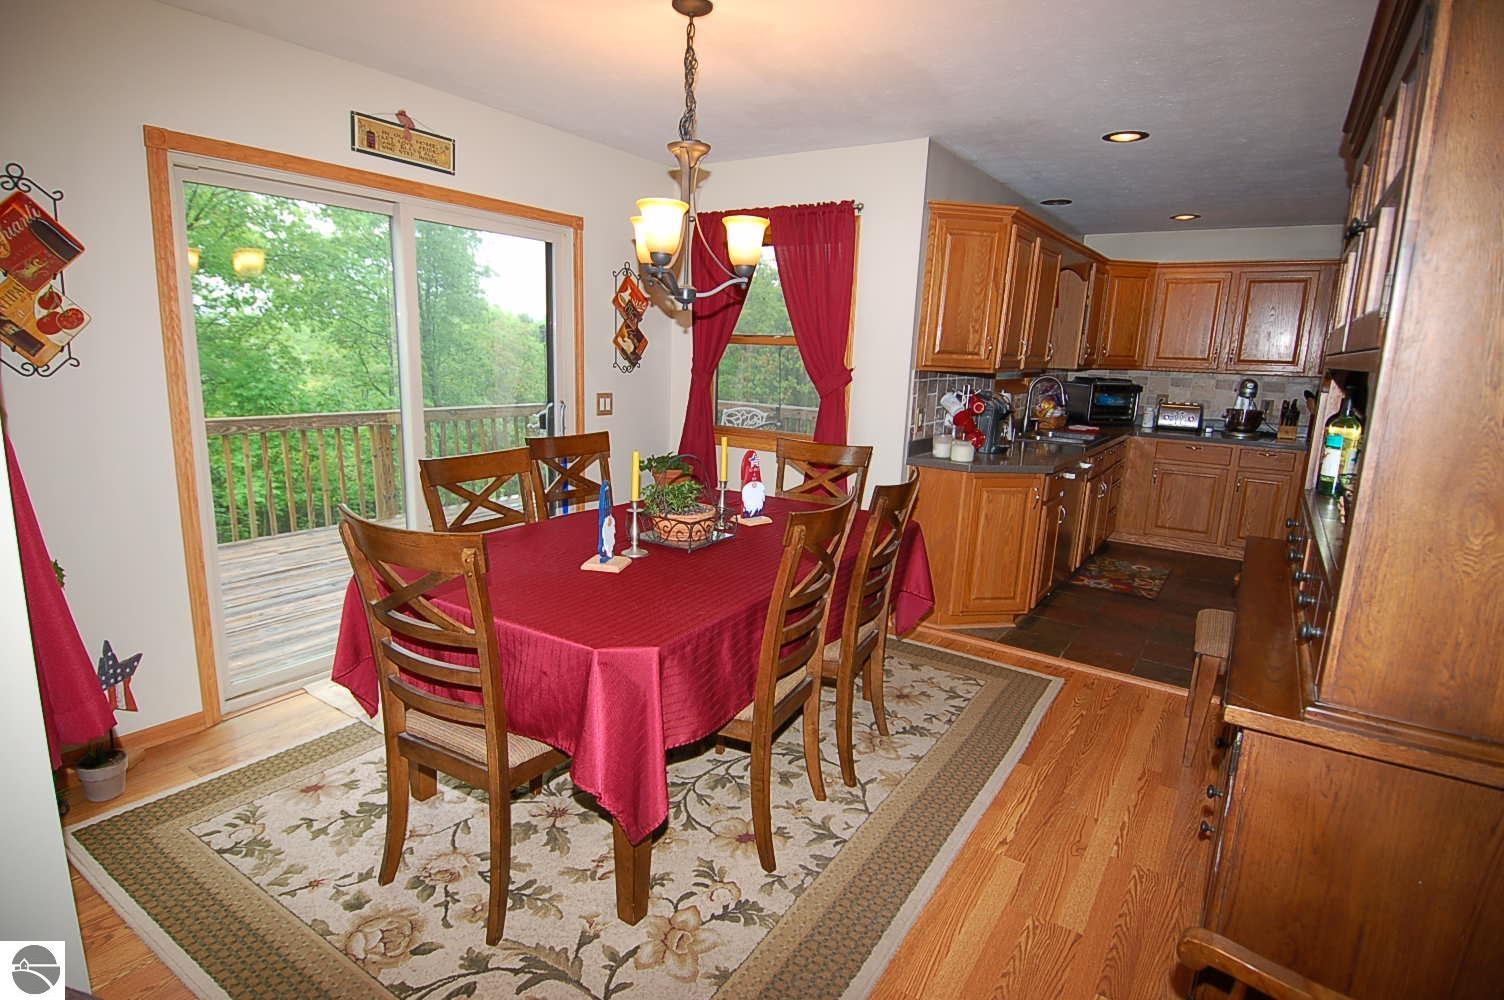 7681 Canthook Drive, Cadillac, MI 49601 photo 5 of 47